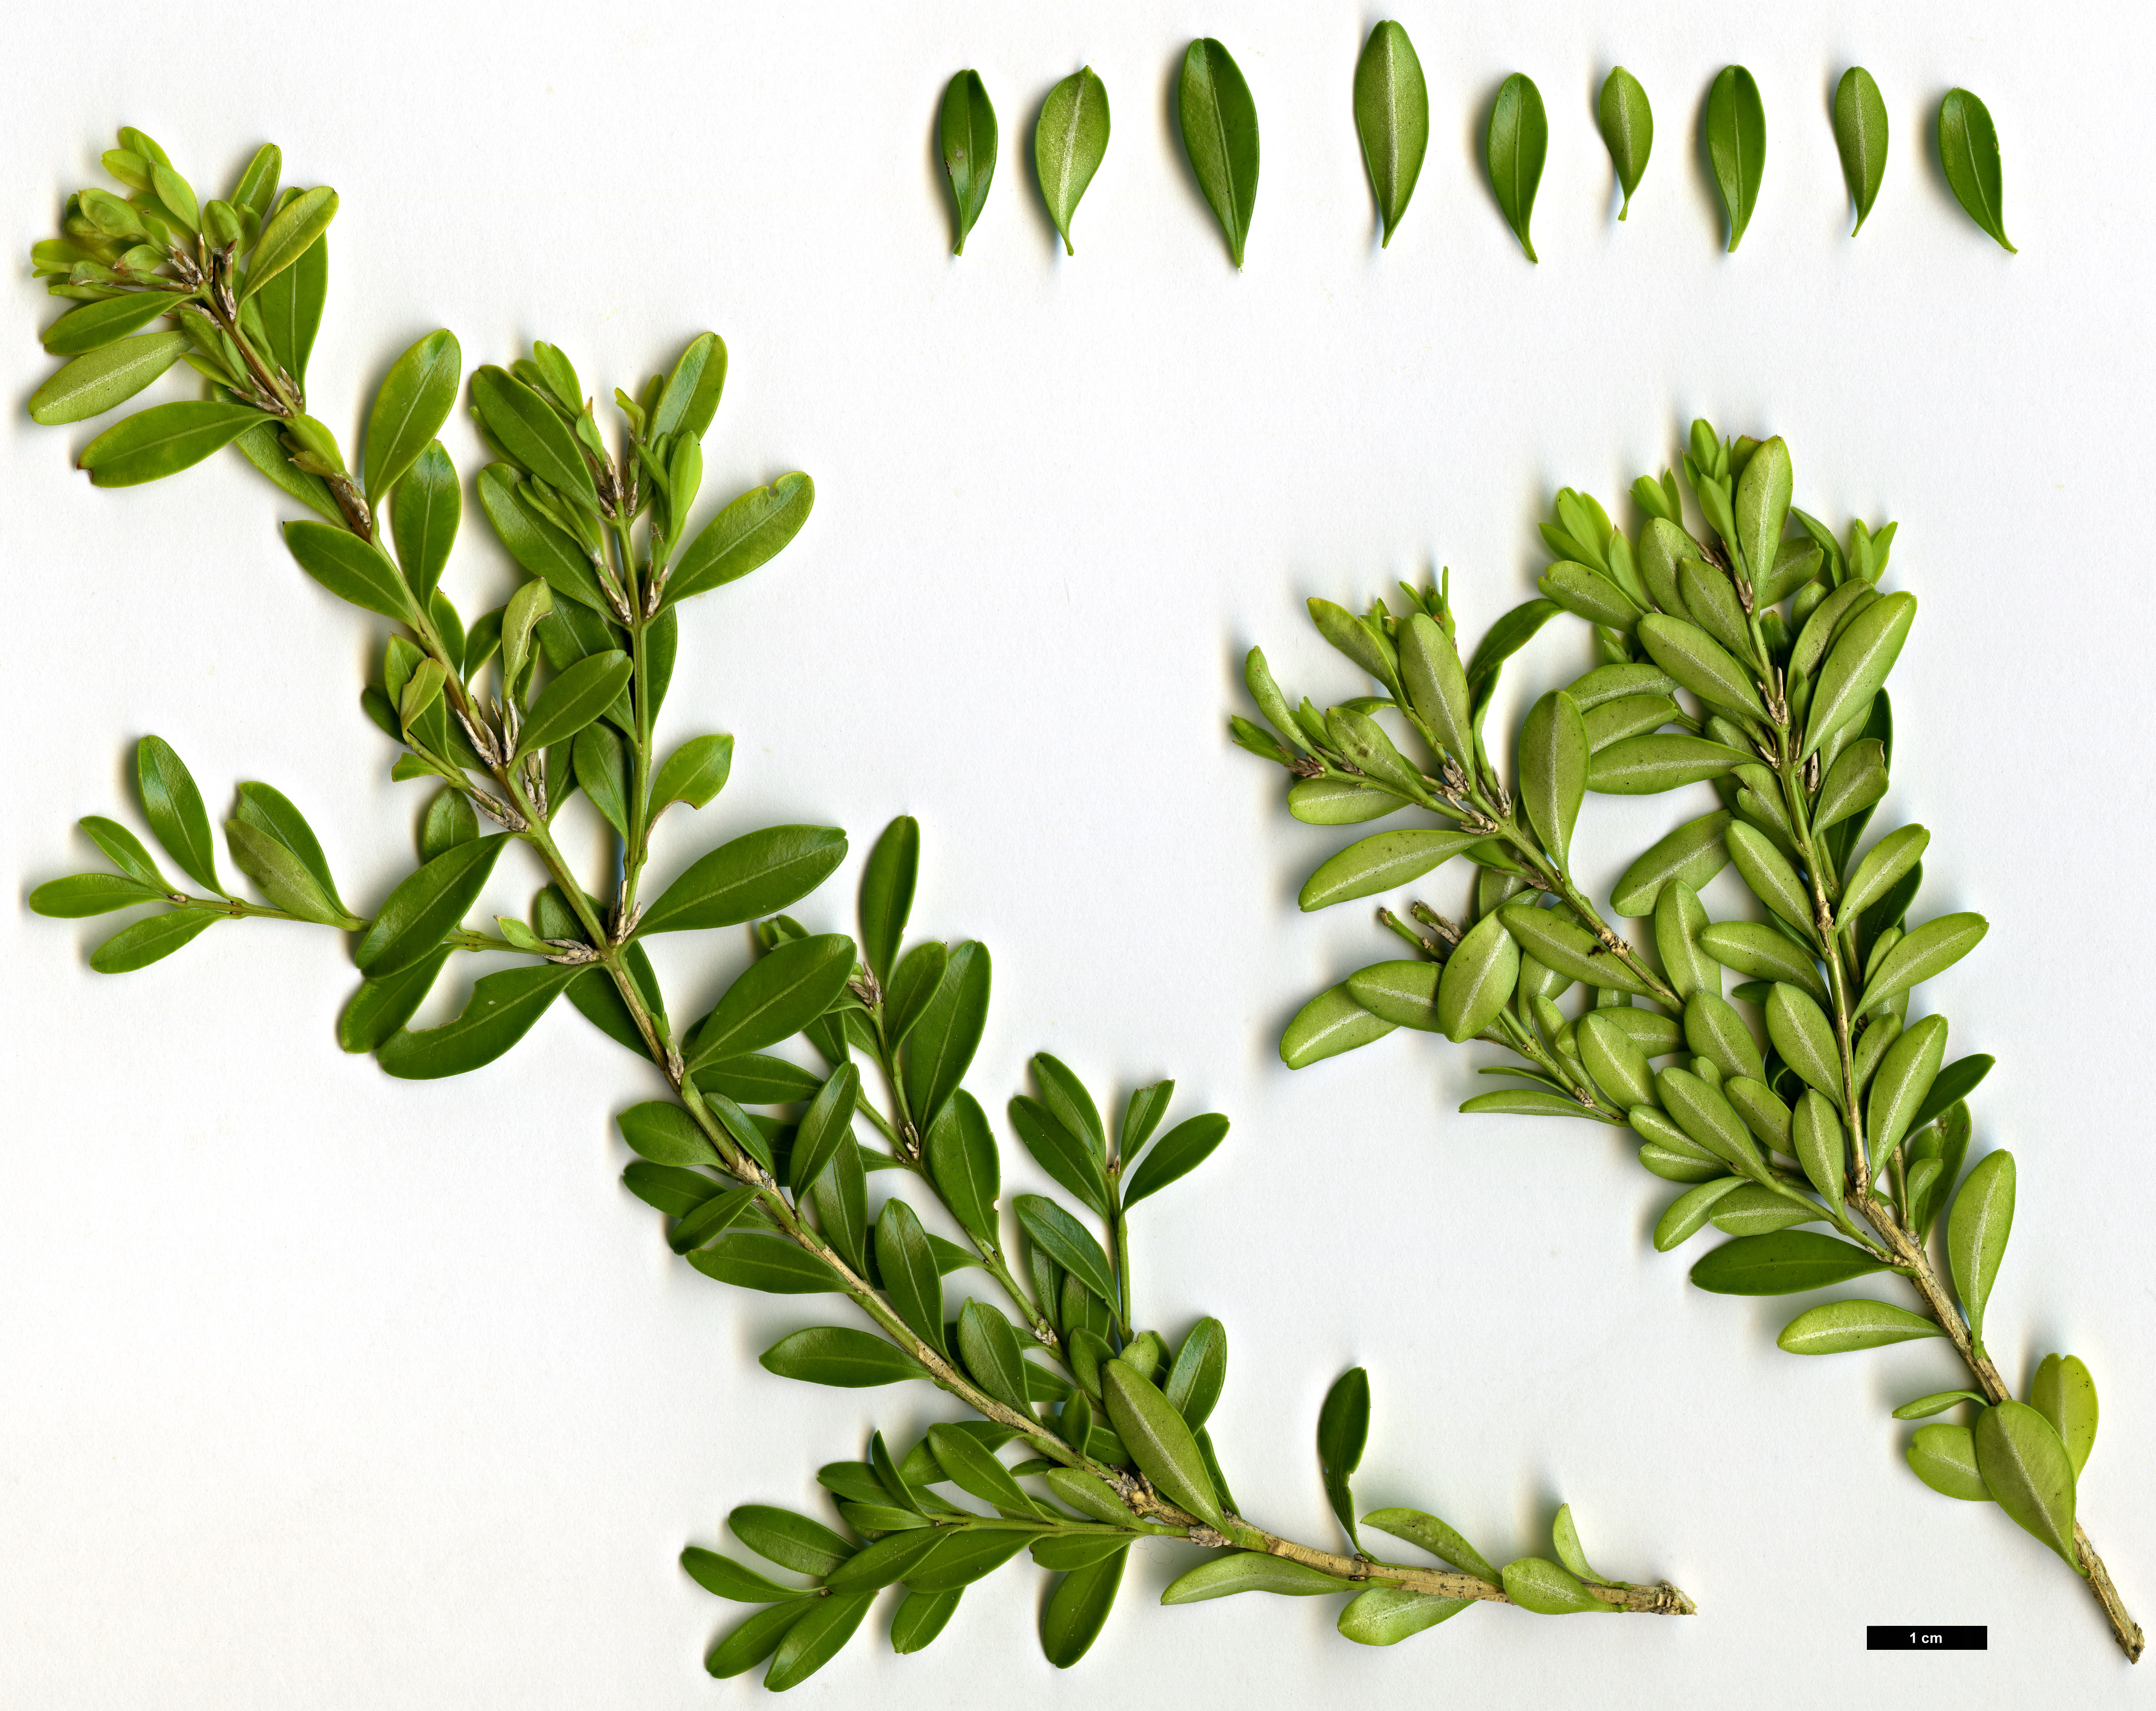 High resolution image: Family: Buxaceae - Genus: Buxus - Taxon: microphylla